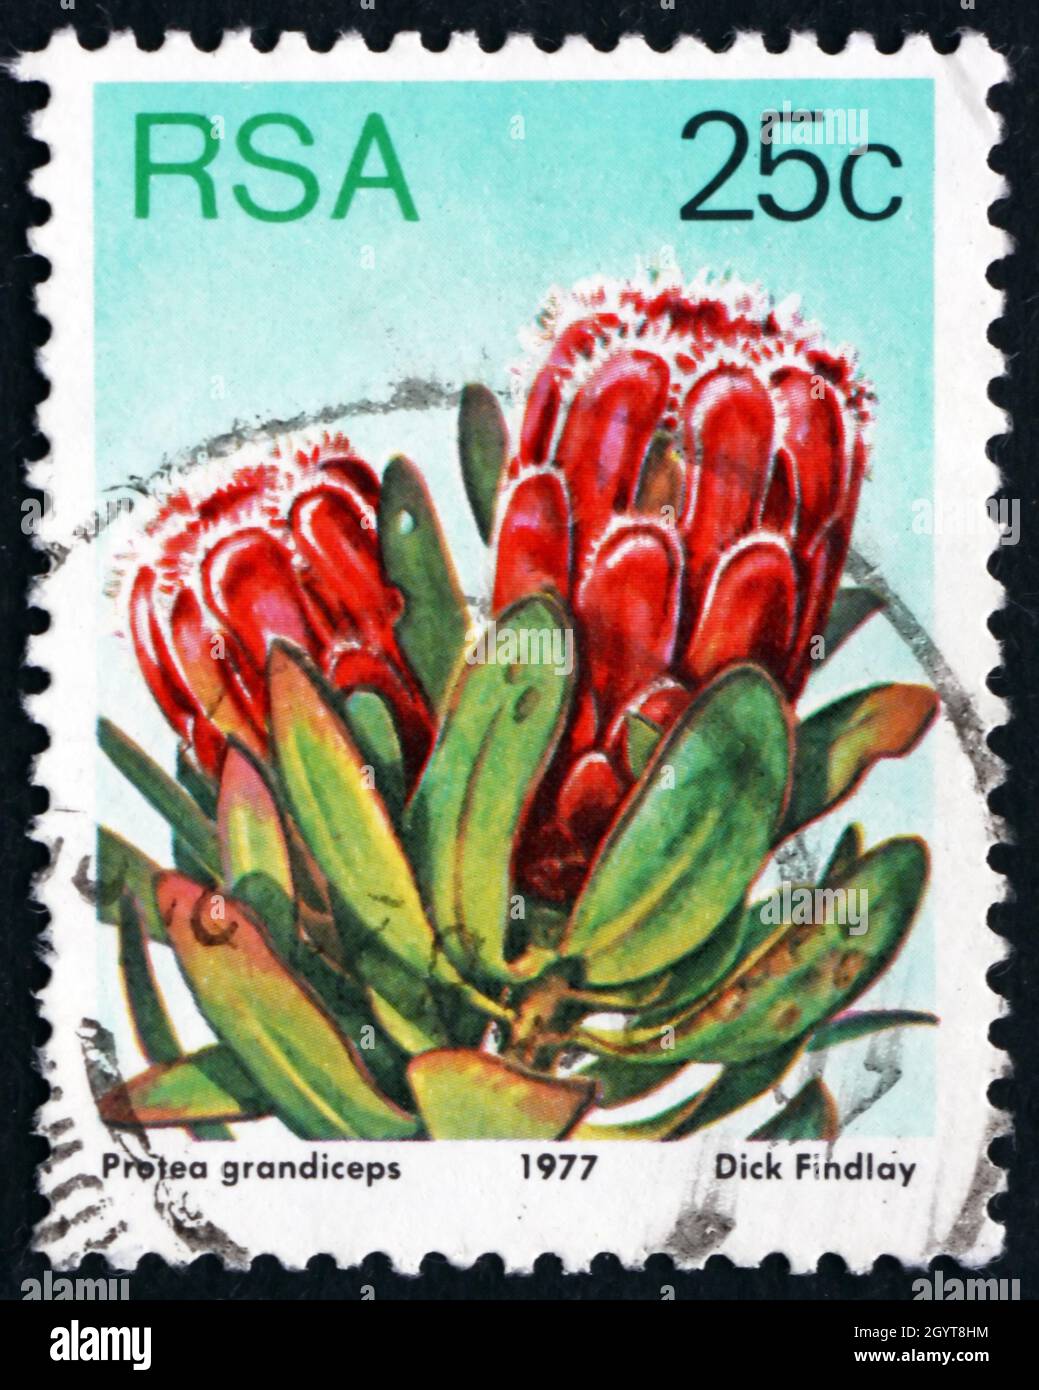 SOUTH AFRICA - CIRCA 1977: a stamp printed in South Africa shows Red Sugarbush, Protea Grandiceps, Flowering Plant, circa 1977 Stock Photo